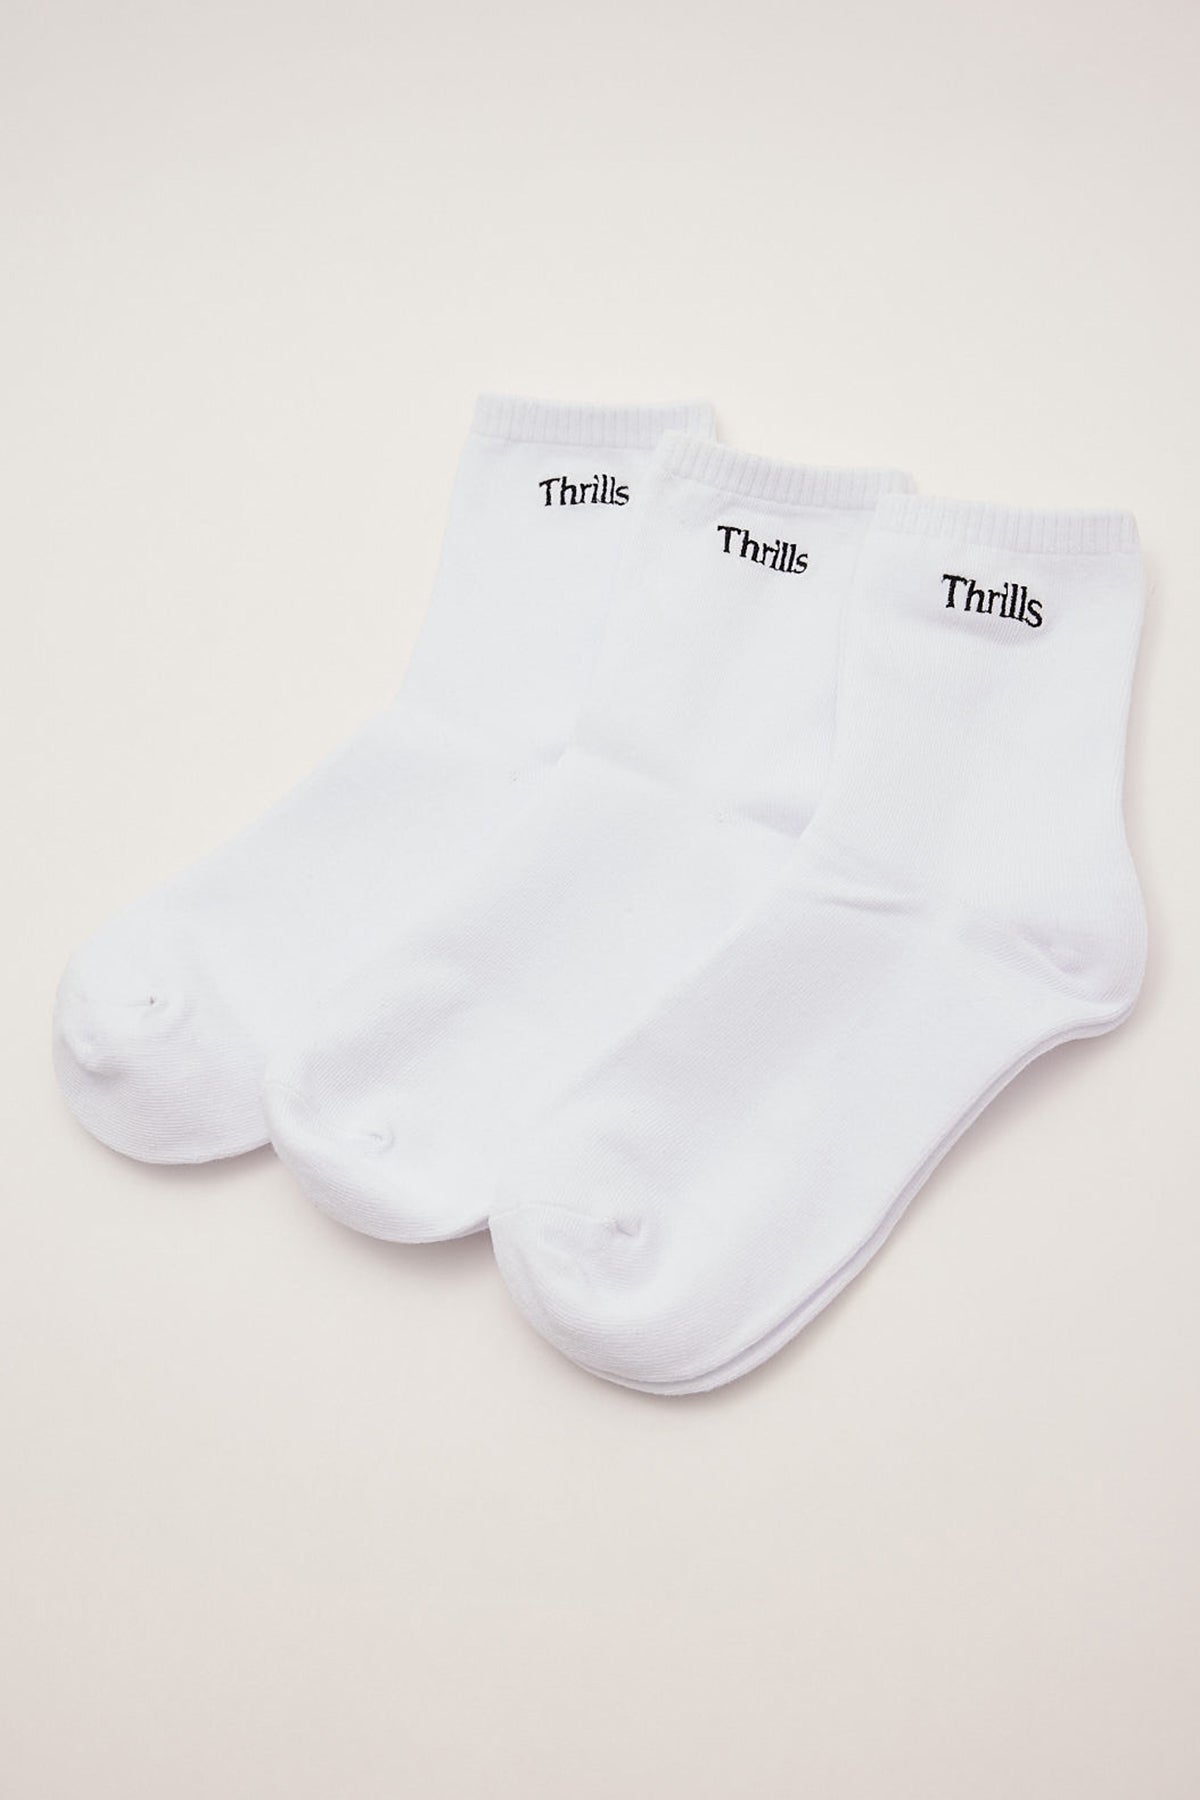 Thrills Arts and Industrial 3Pk Crew Sock White